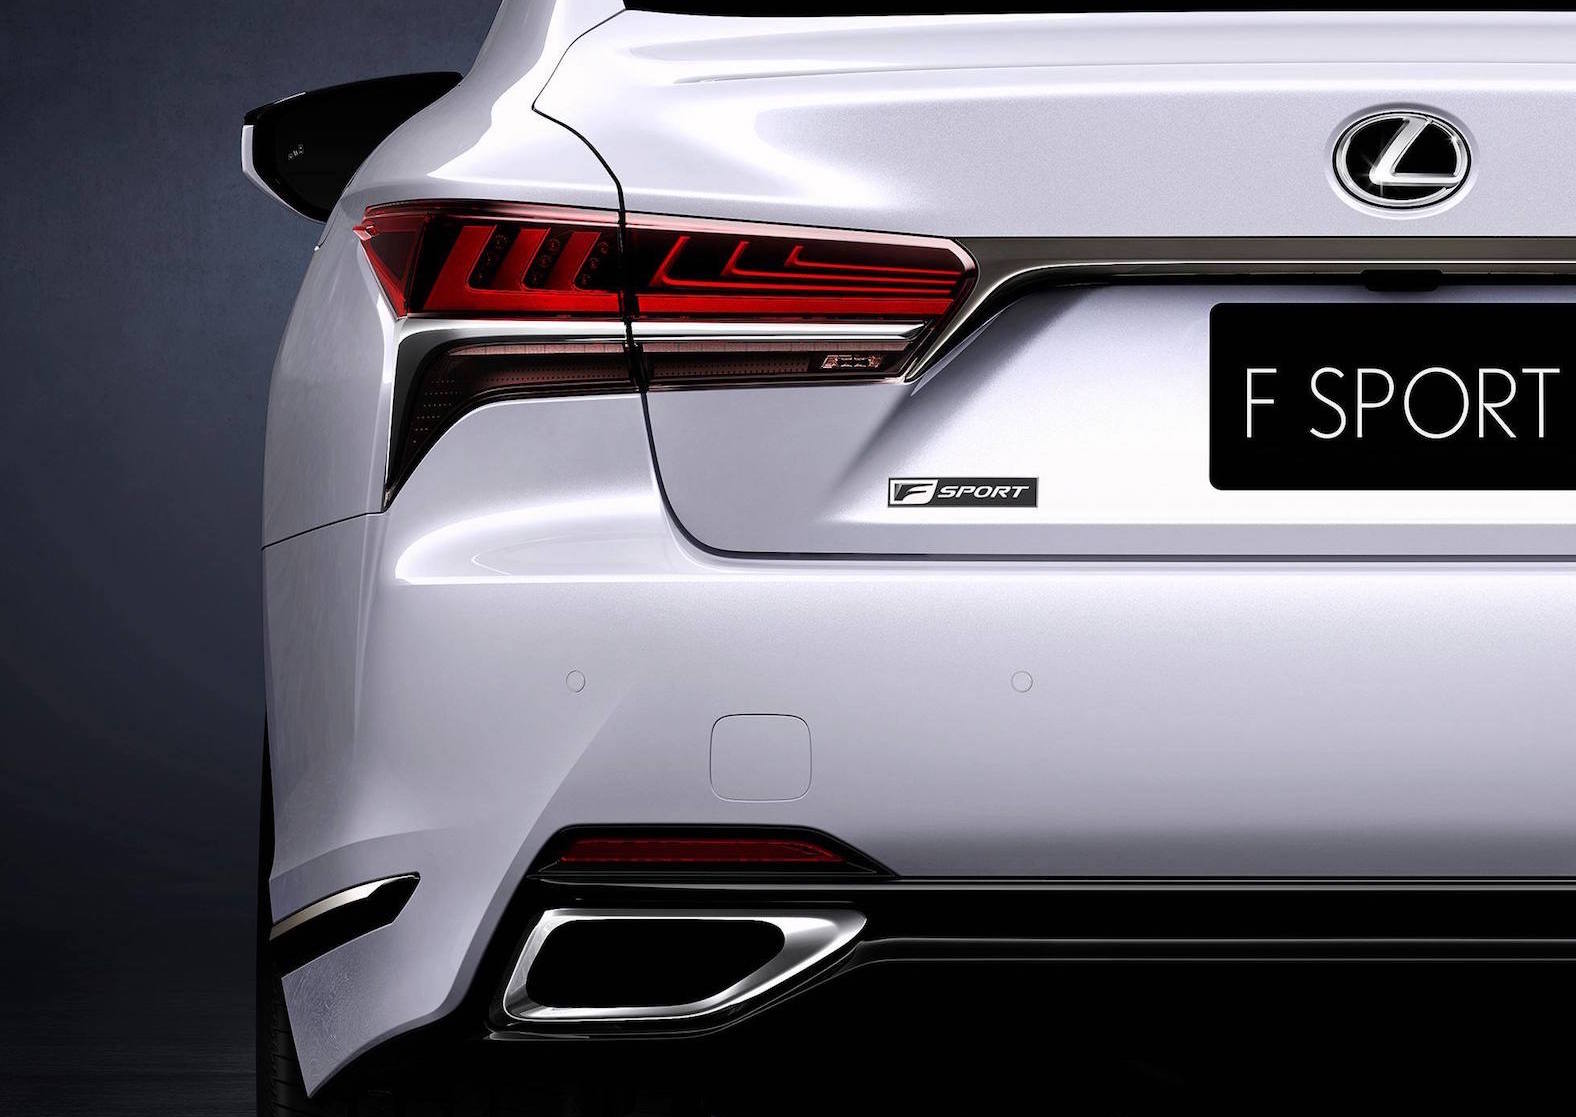 2018 Lexus LS 500 F Sport previewed, debuts at New York show